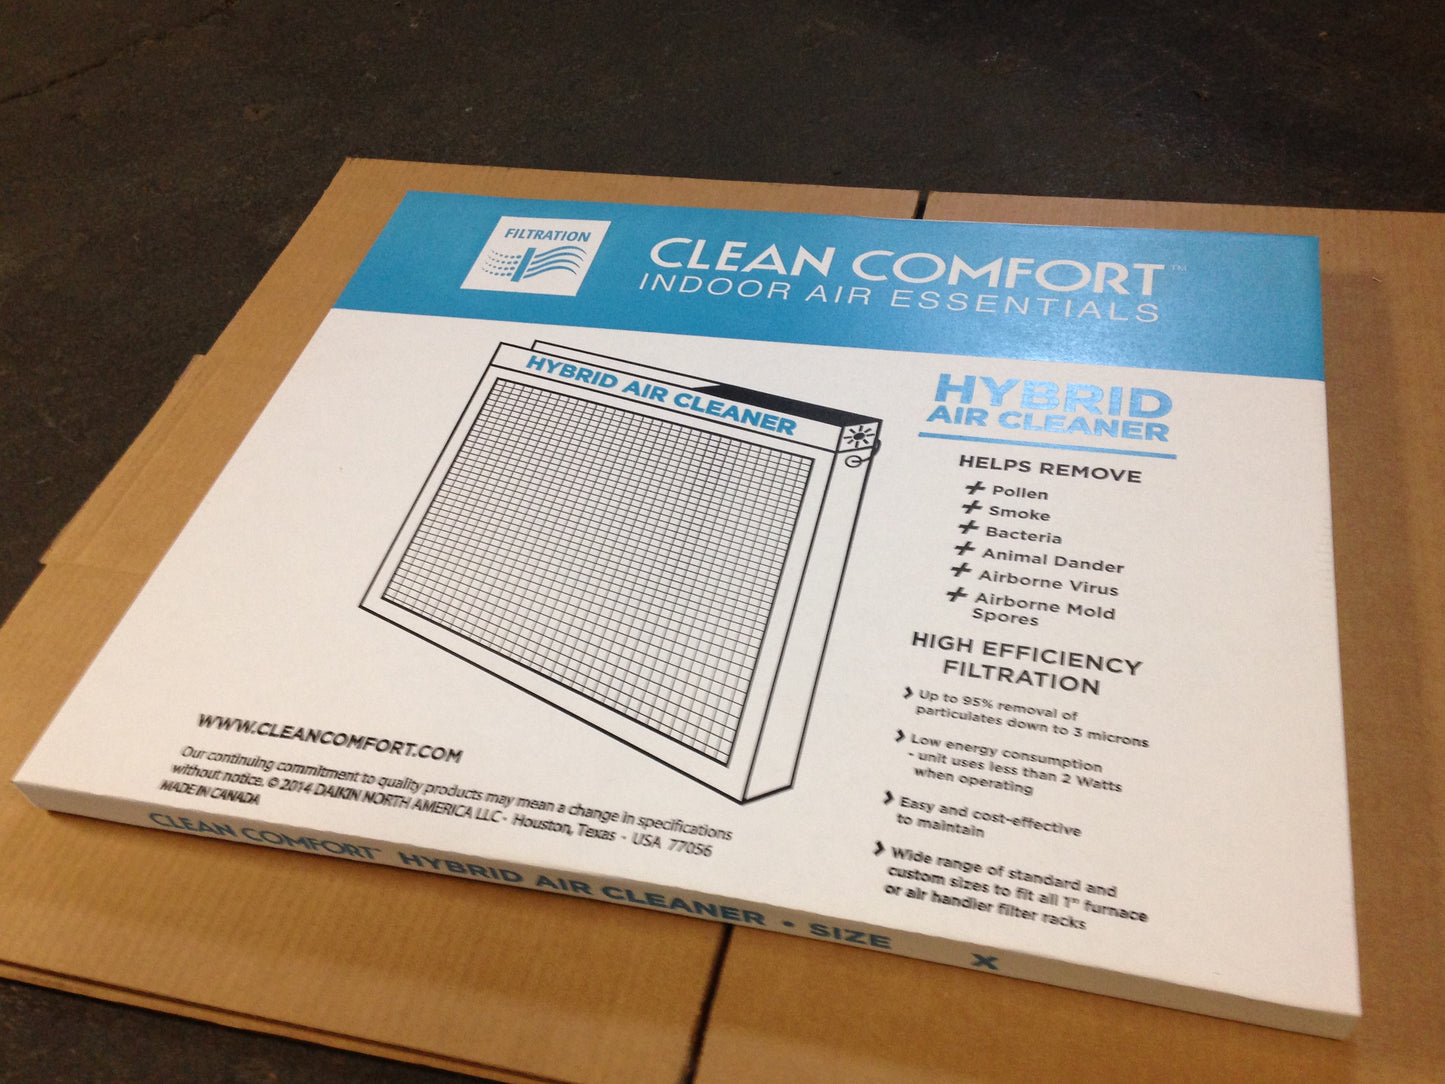 1" ELECTRONIC AIR CLEANER, 15" X 20", 24 VAC/60